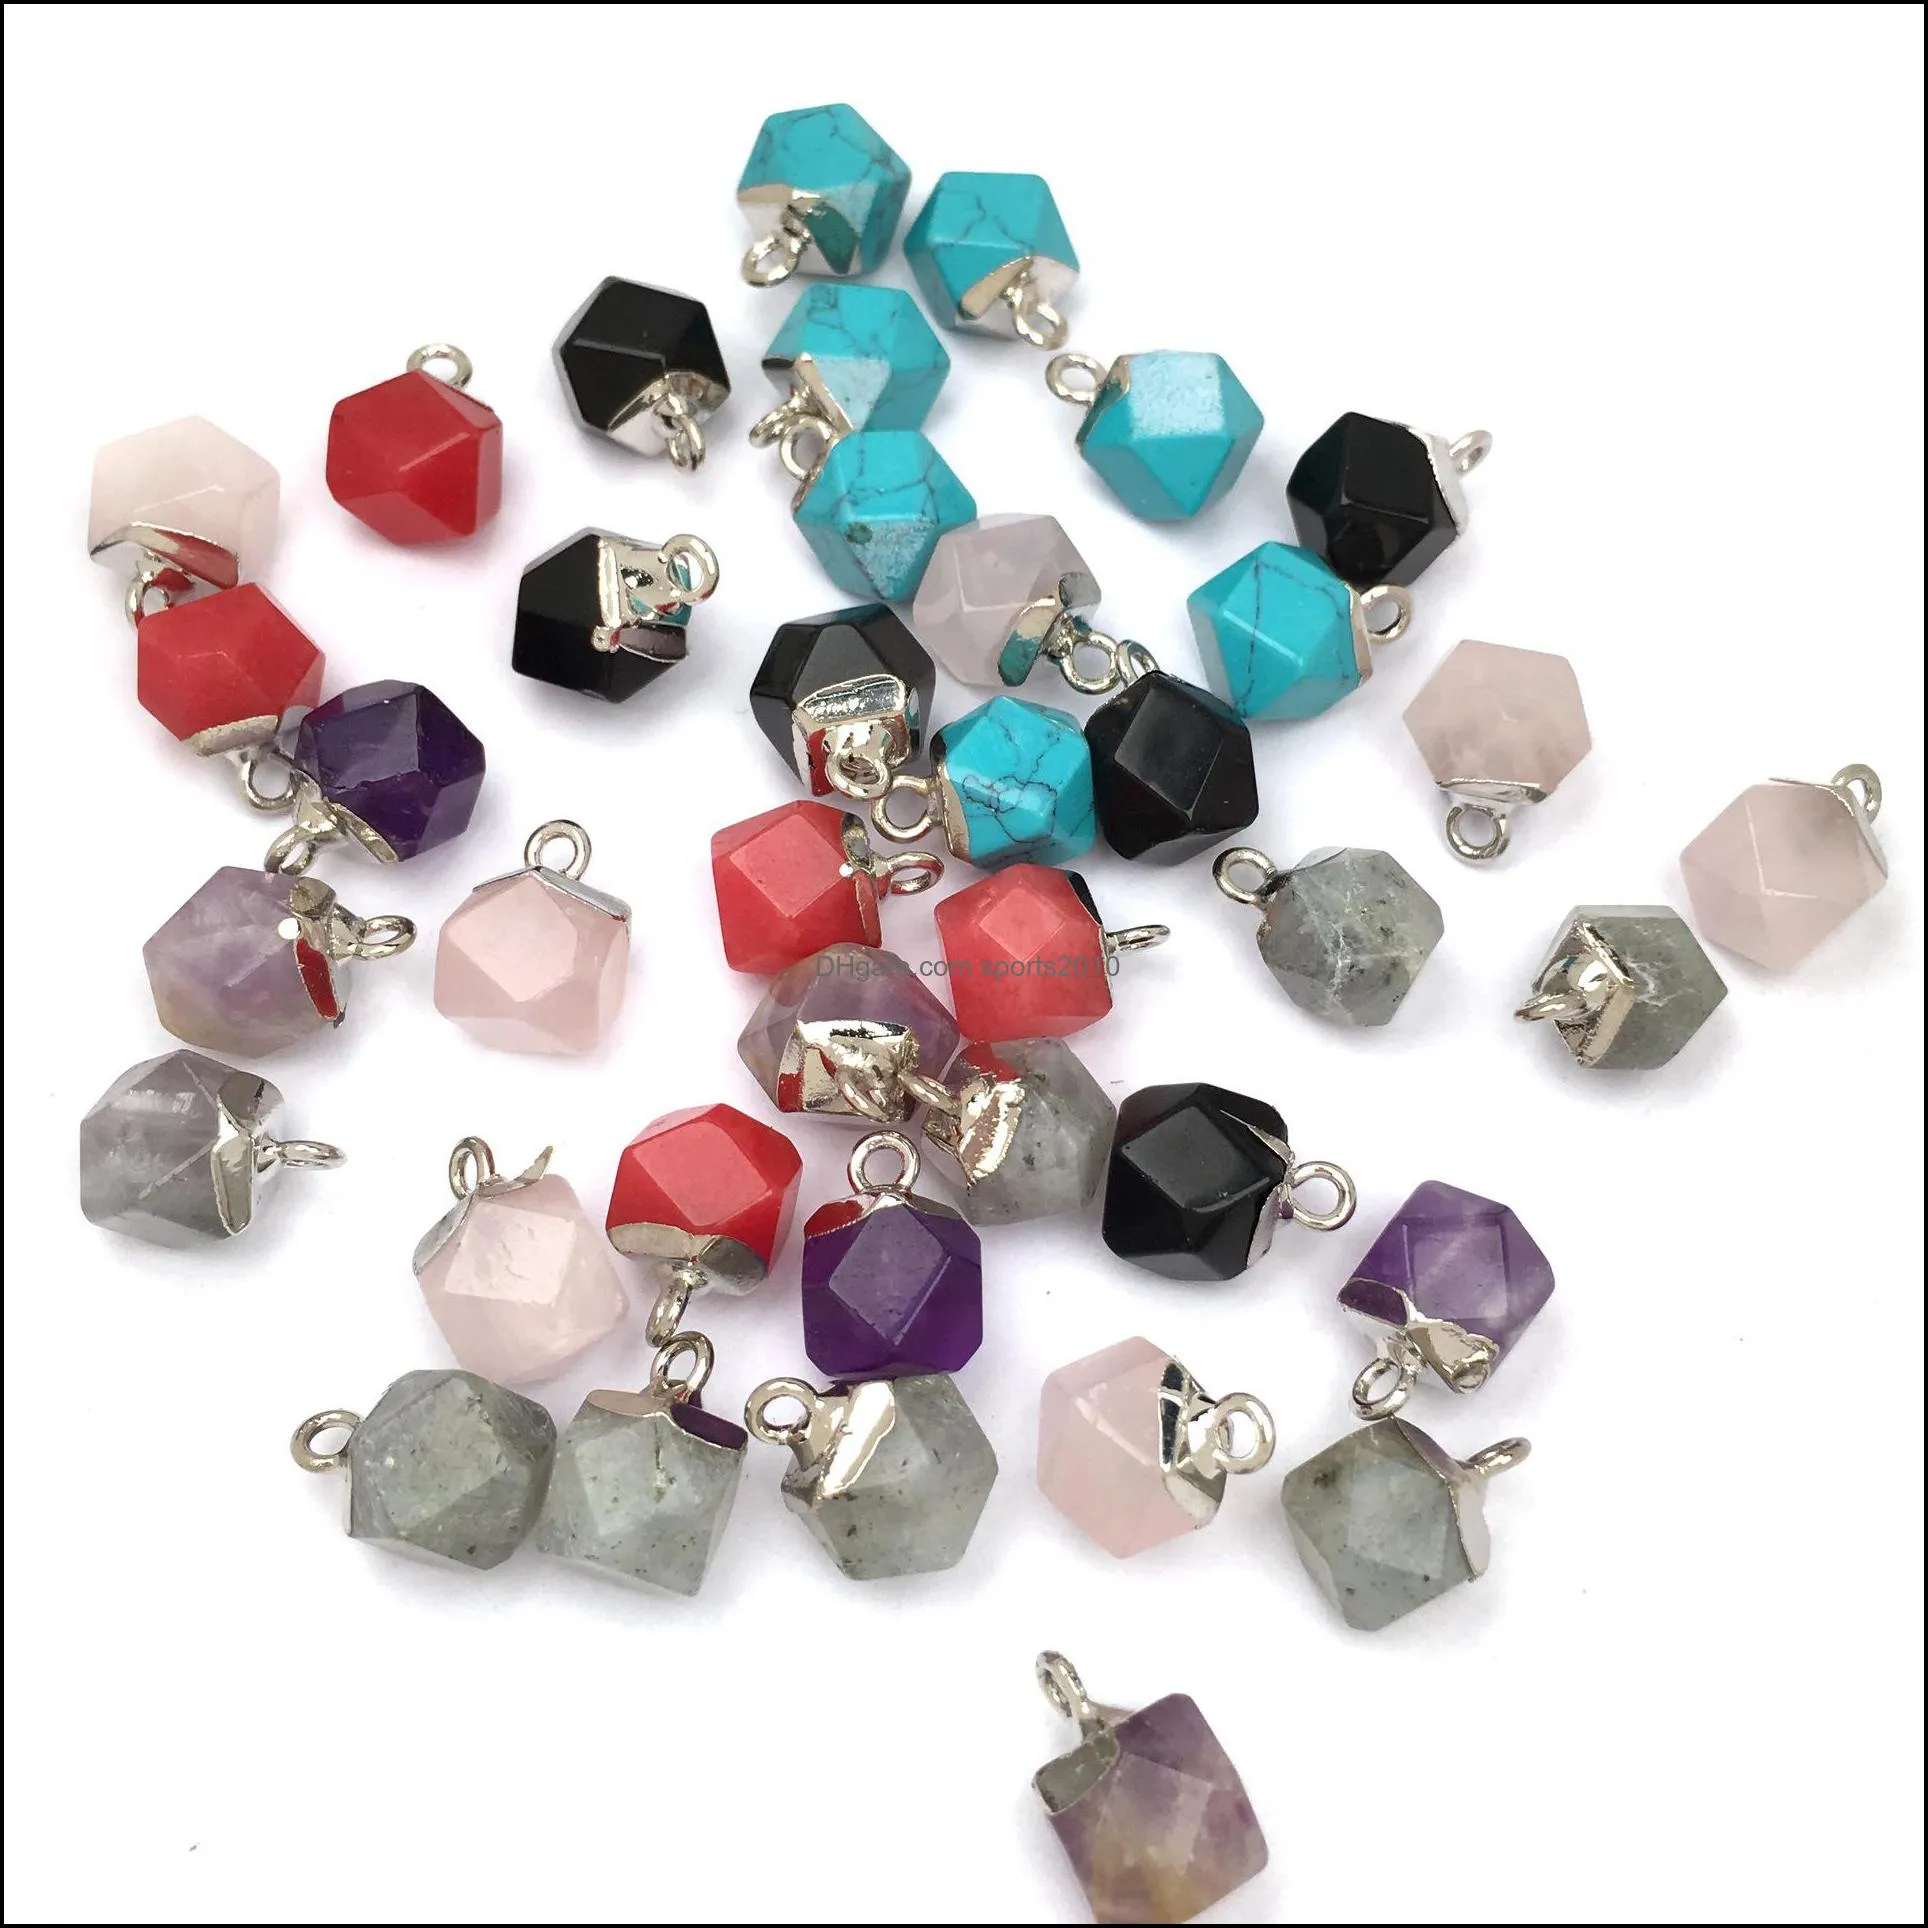 faceted polygon round shape natural stone charms healing agates crystal turquoises jades opal stones pendant sports2010